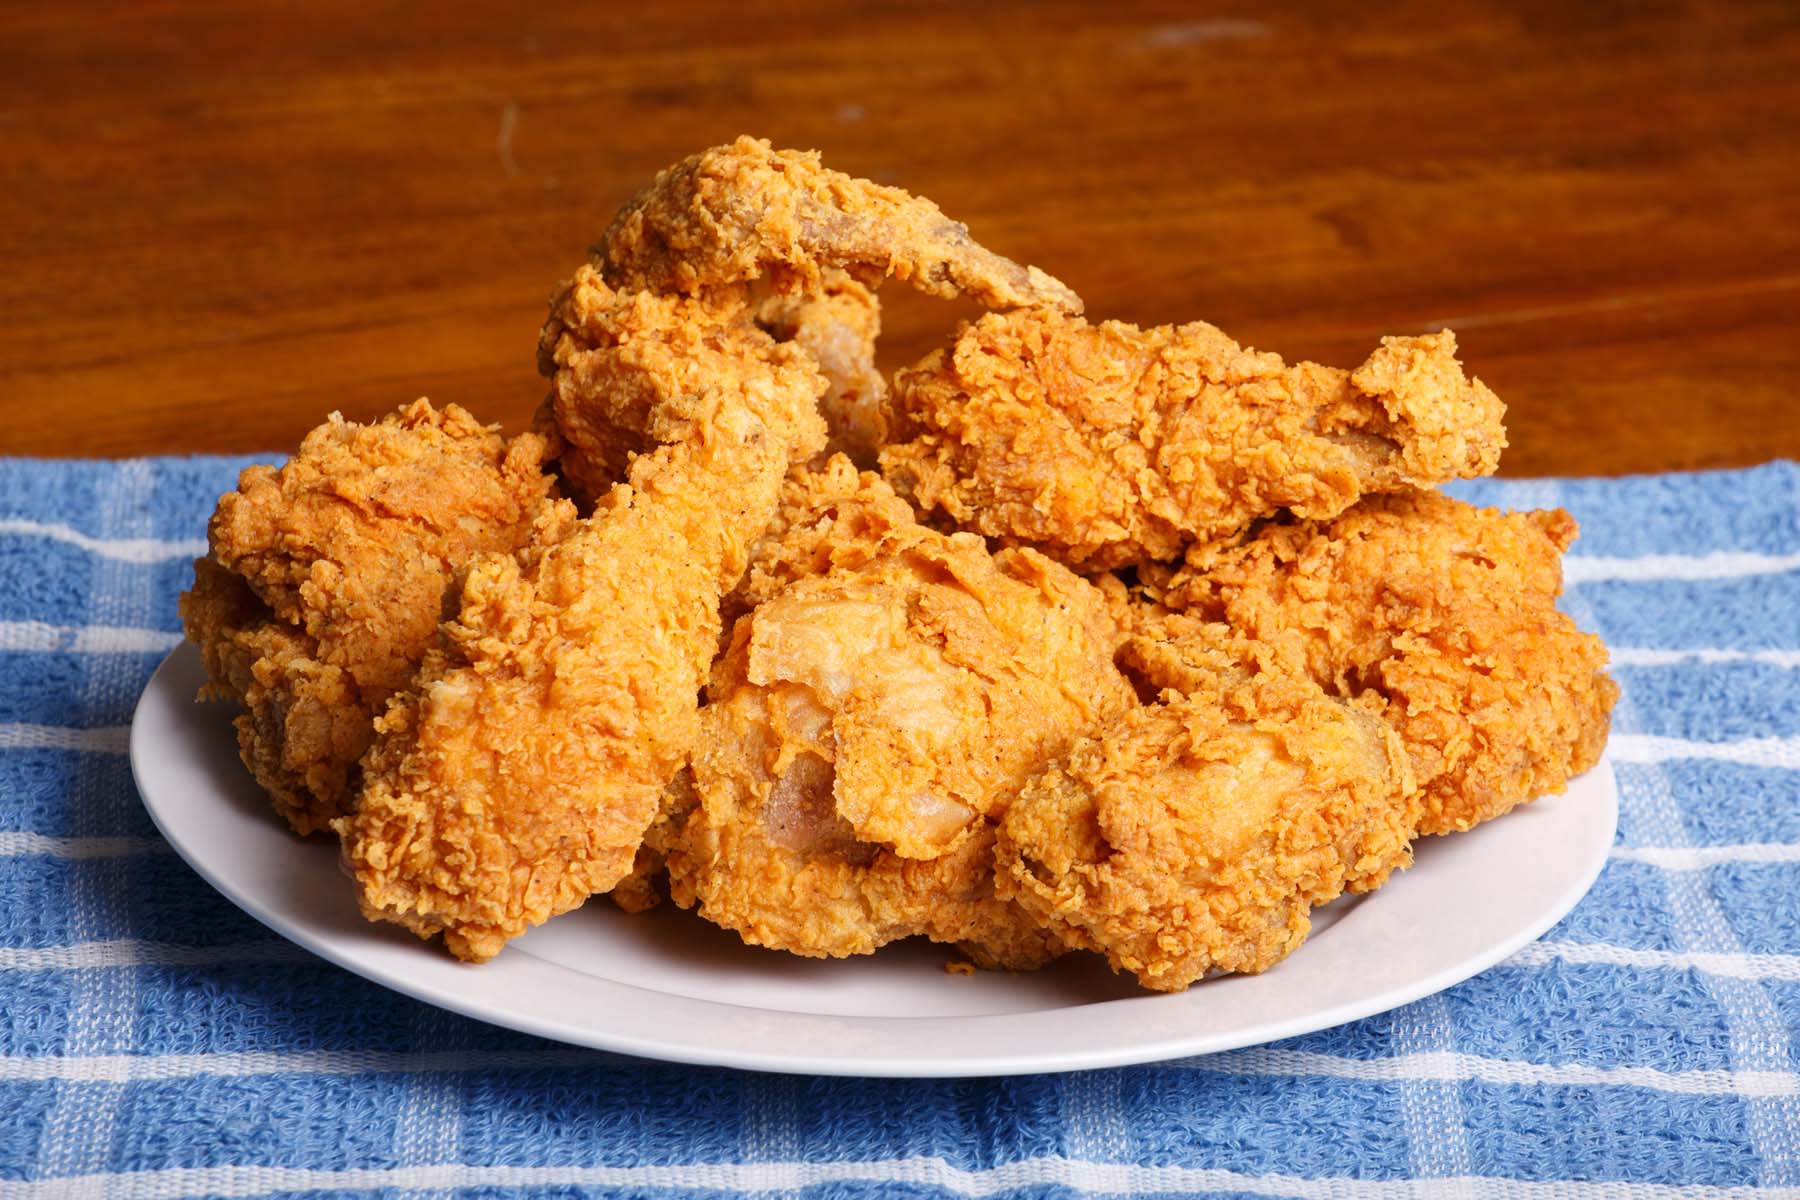 How To Cook Fried Chicken In A Pressure Cooker - Recipes.net